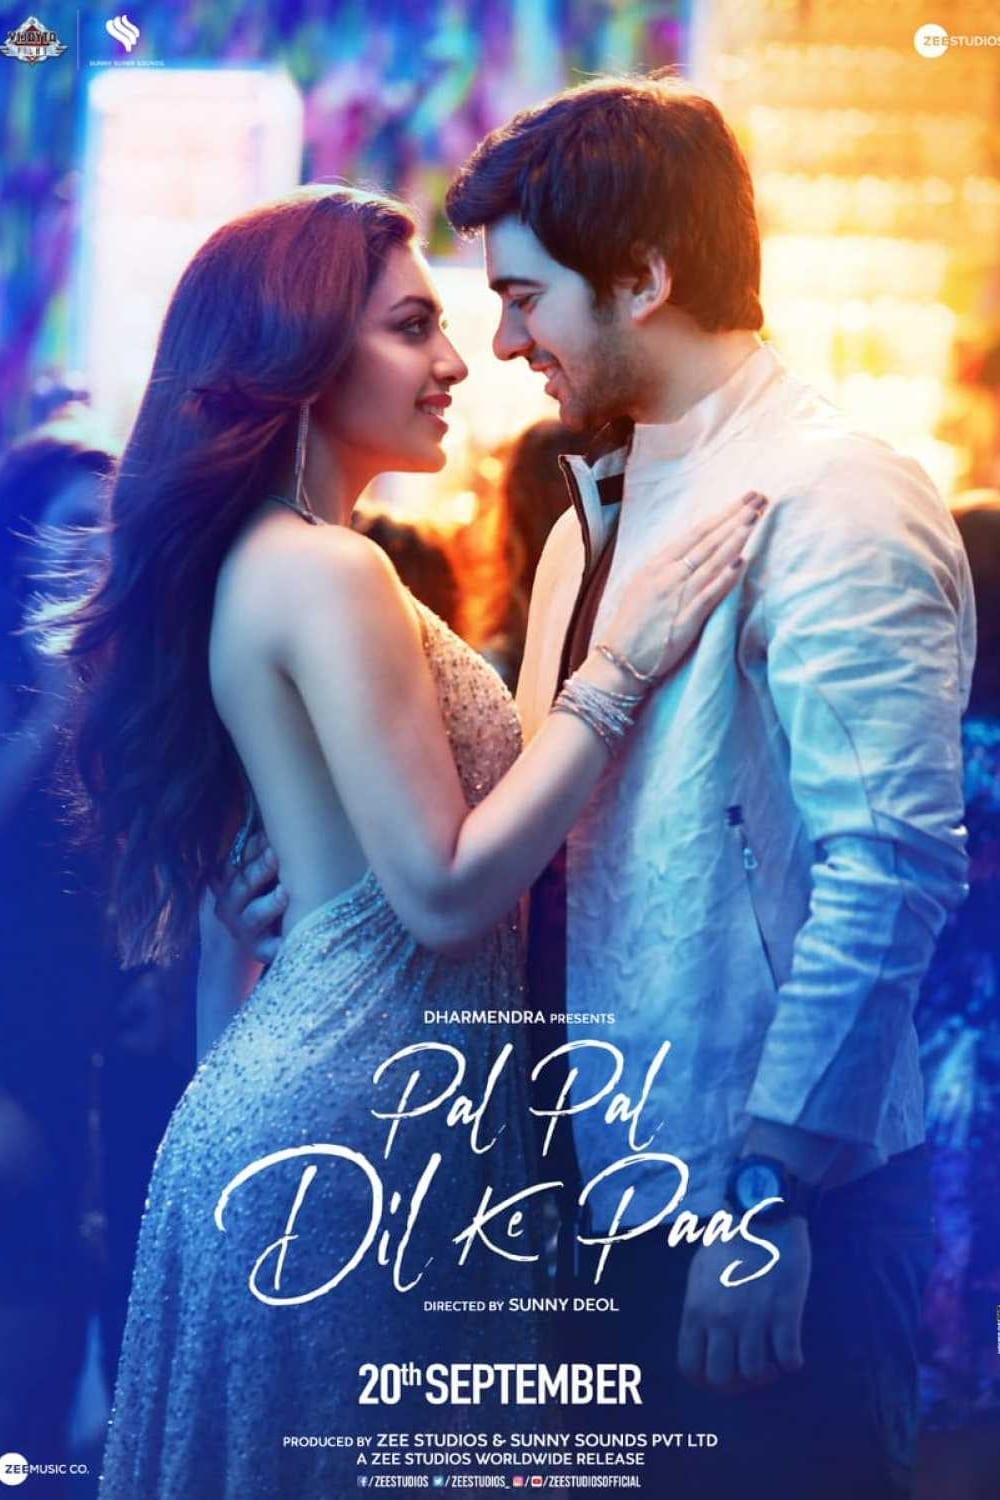 Poster for the movie "Pal Pal Dil Ke Paas"